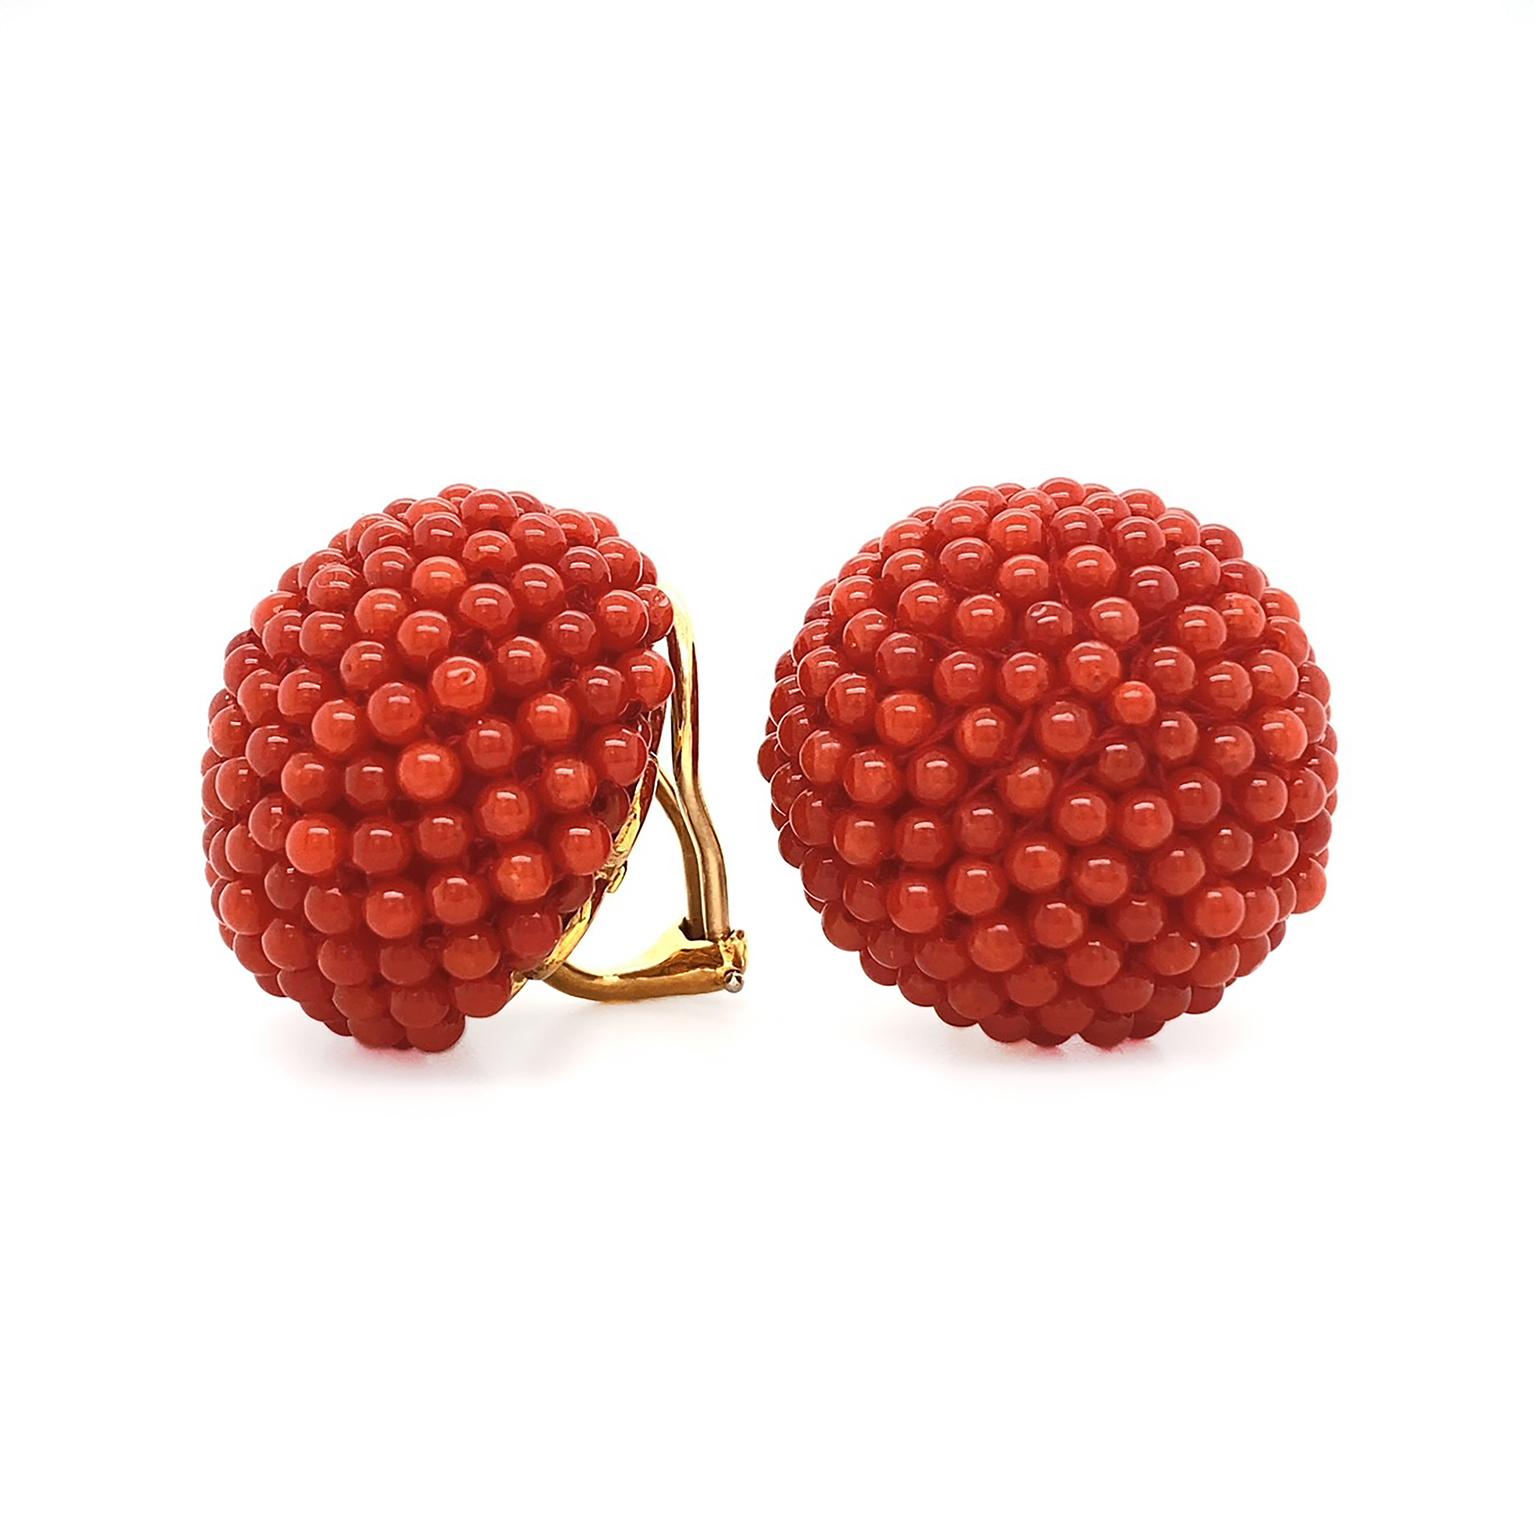 The remarkable vivid hue of red coral is featured in these earrings. The gemstone is carved into miniature round beads and arranged close together for a detailed and textured pattern. The total weight of the red coral is 14.8 carats. 18k yellow gold